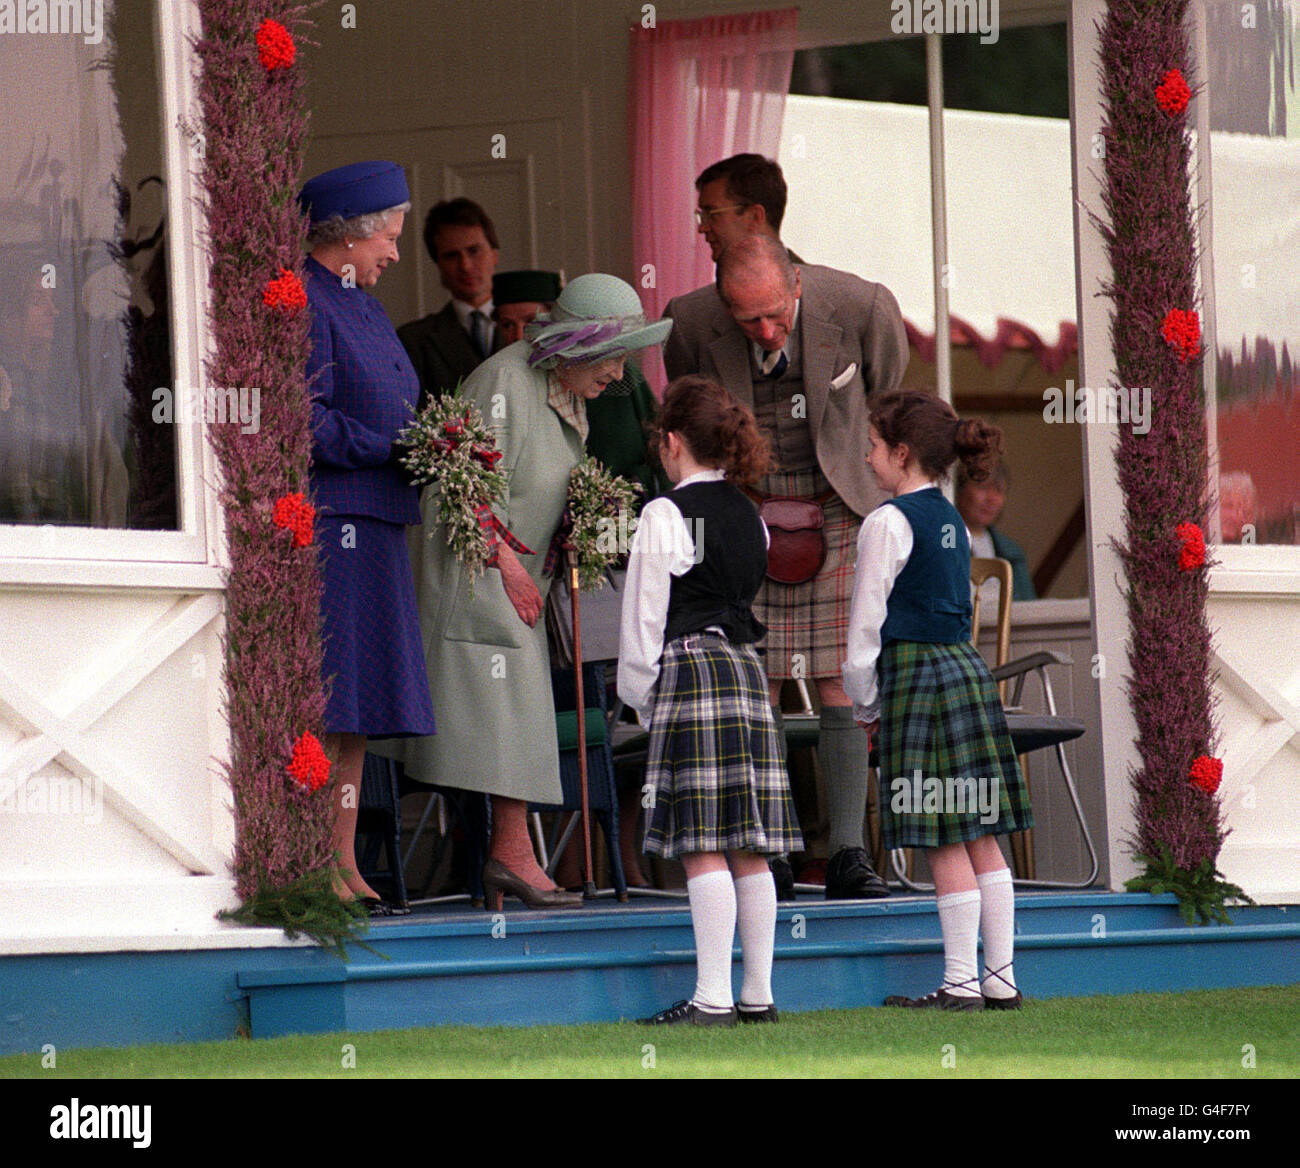 PA NEWS PHOTO 5/9/98 THE QUEEN AND QUEEN MOTHER RECEIVE FLOWERS FROM TWO GIRLS WHILE THE DUKE OF EDINBURGH LOOKS ON AT THE HIGHLAND GAMES AT BRAEMAR CLOSE TO THEIR HOLIDAY HOME OF BALMORAL CASTLE. Stock Photo